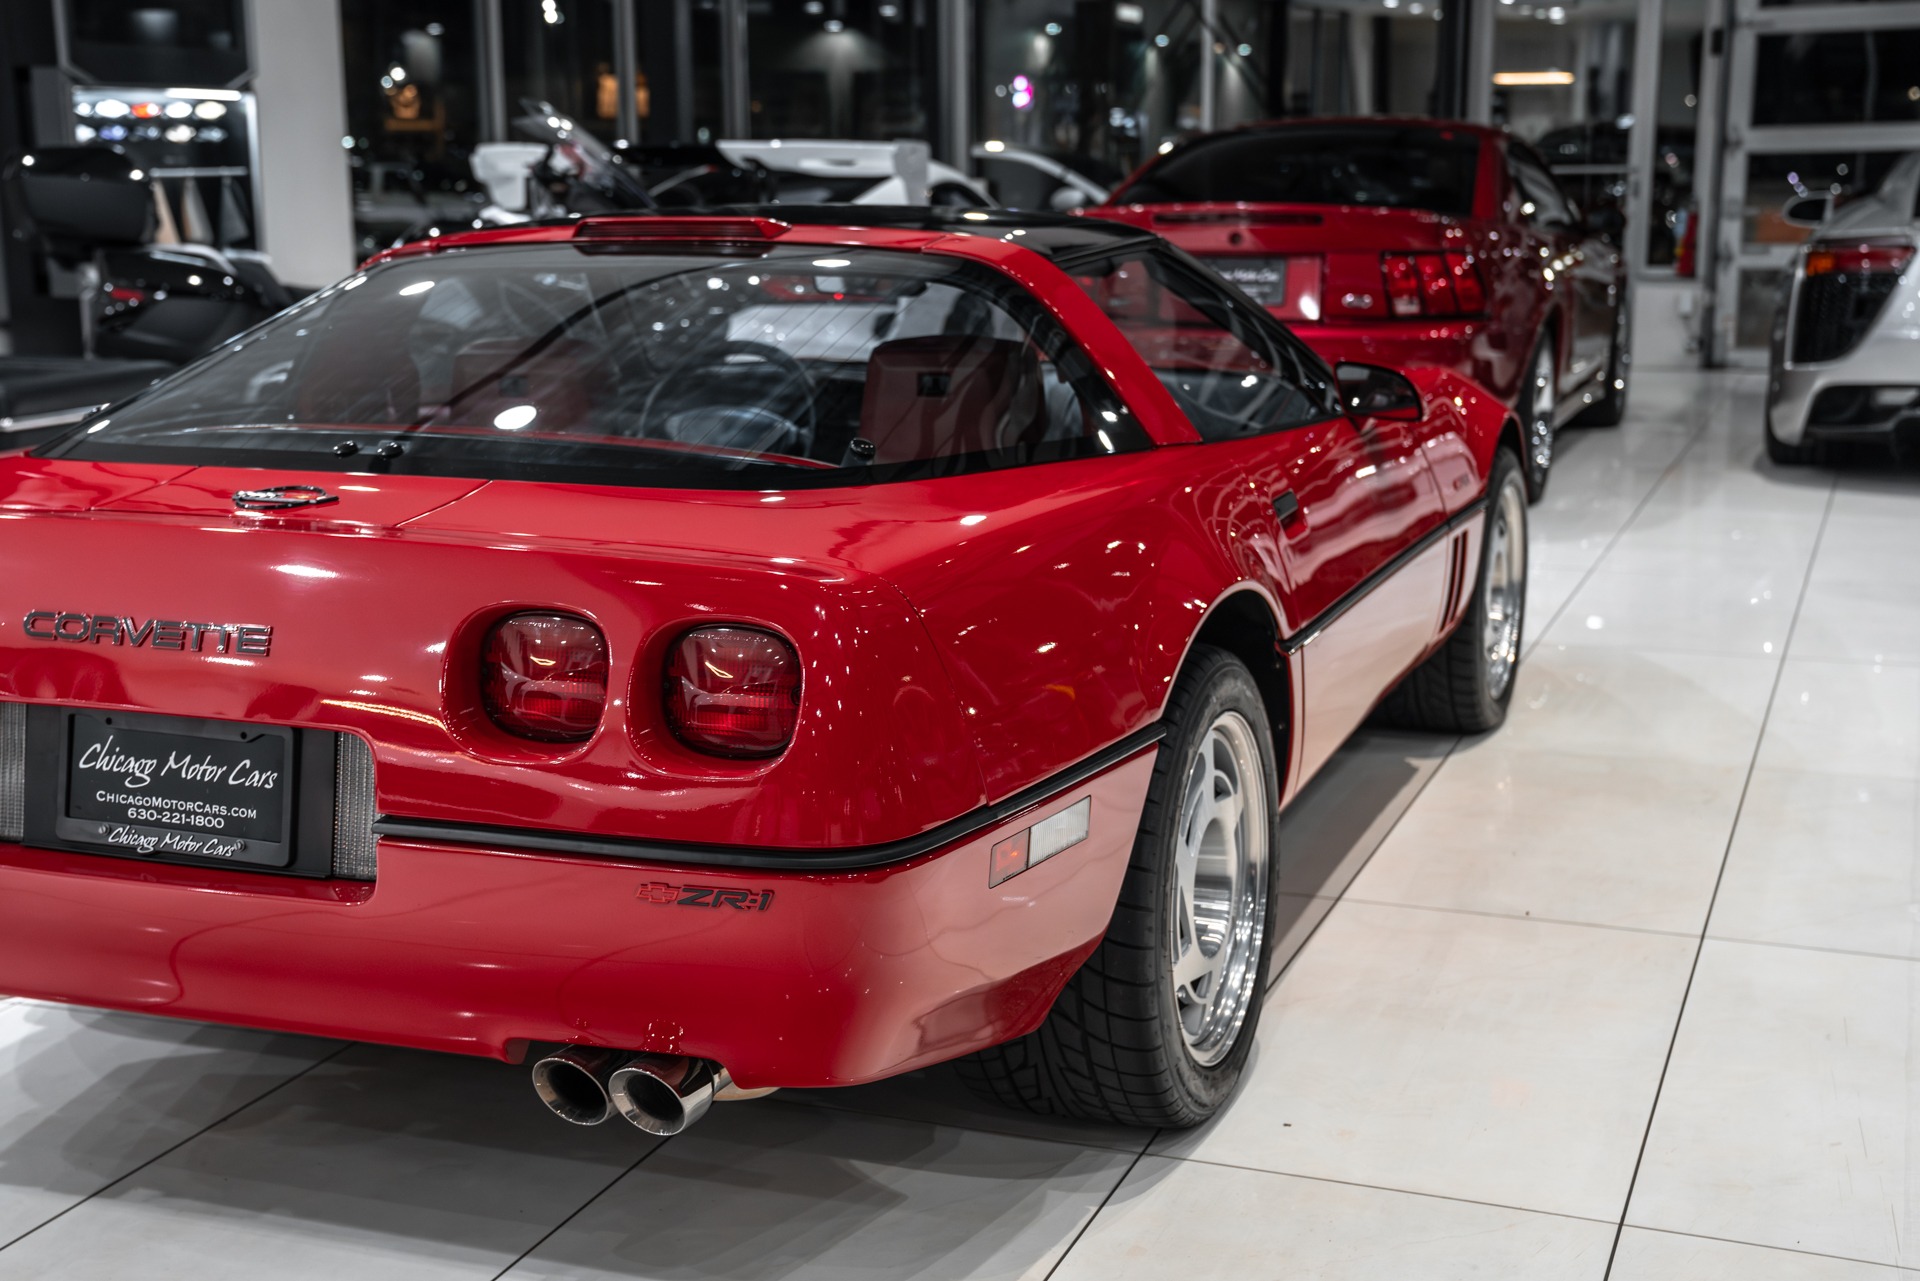 Used 1990 Chevrolet Corvette ZR1 Coupe Red on Red! ONLY 6800 Miles 